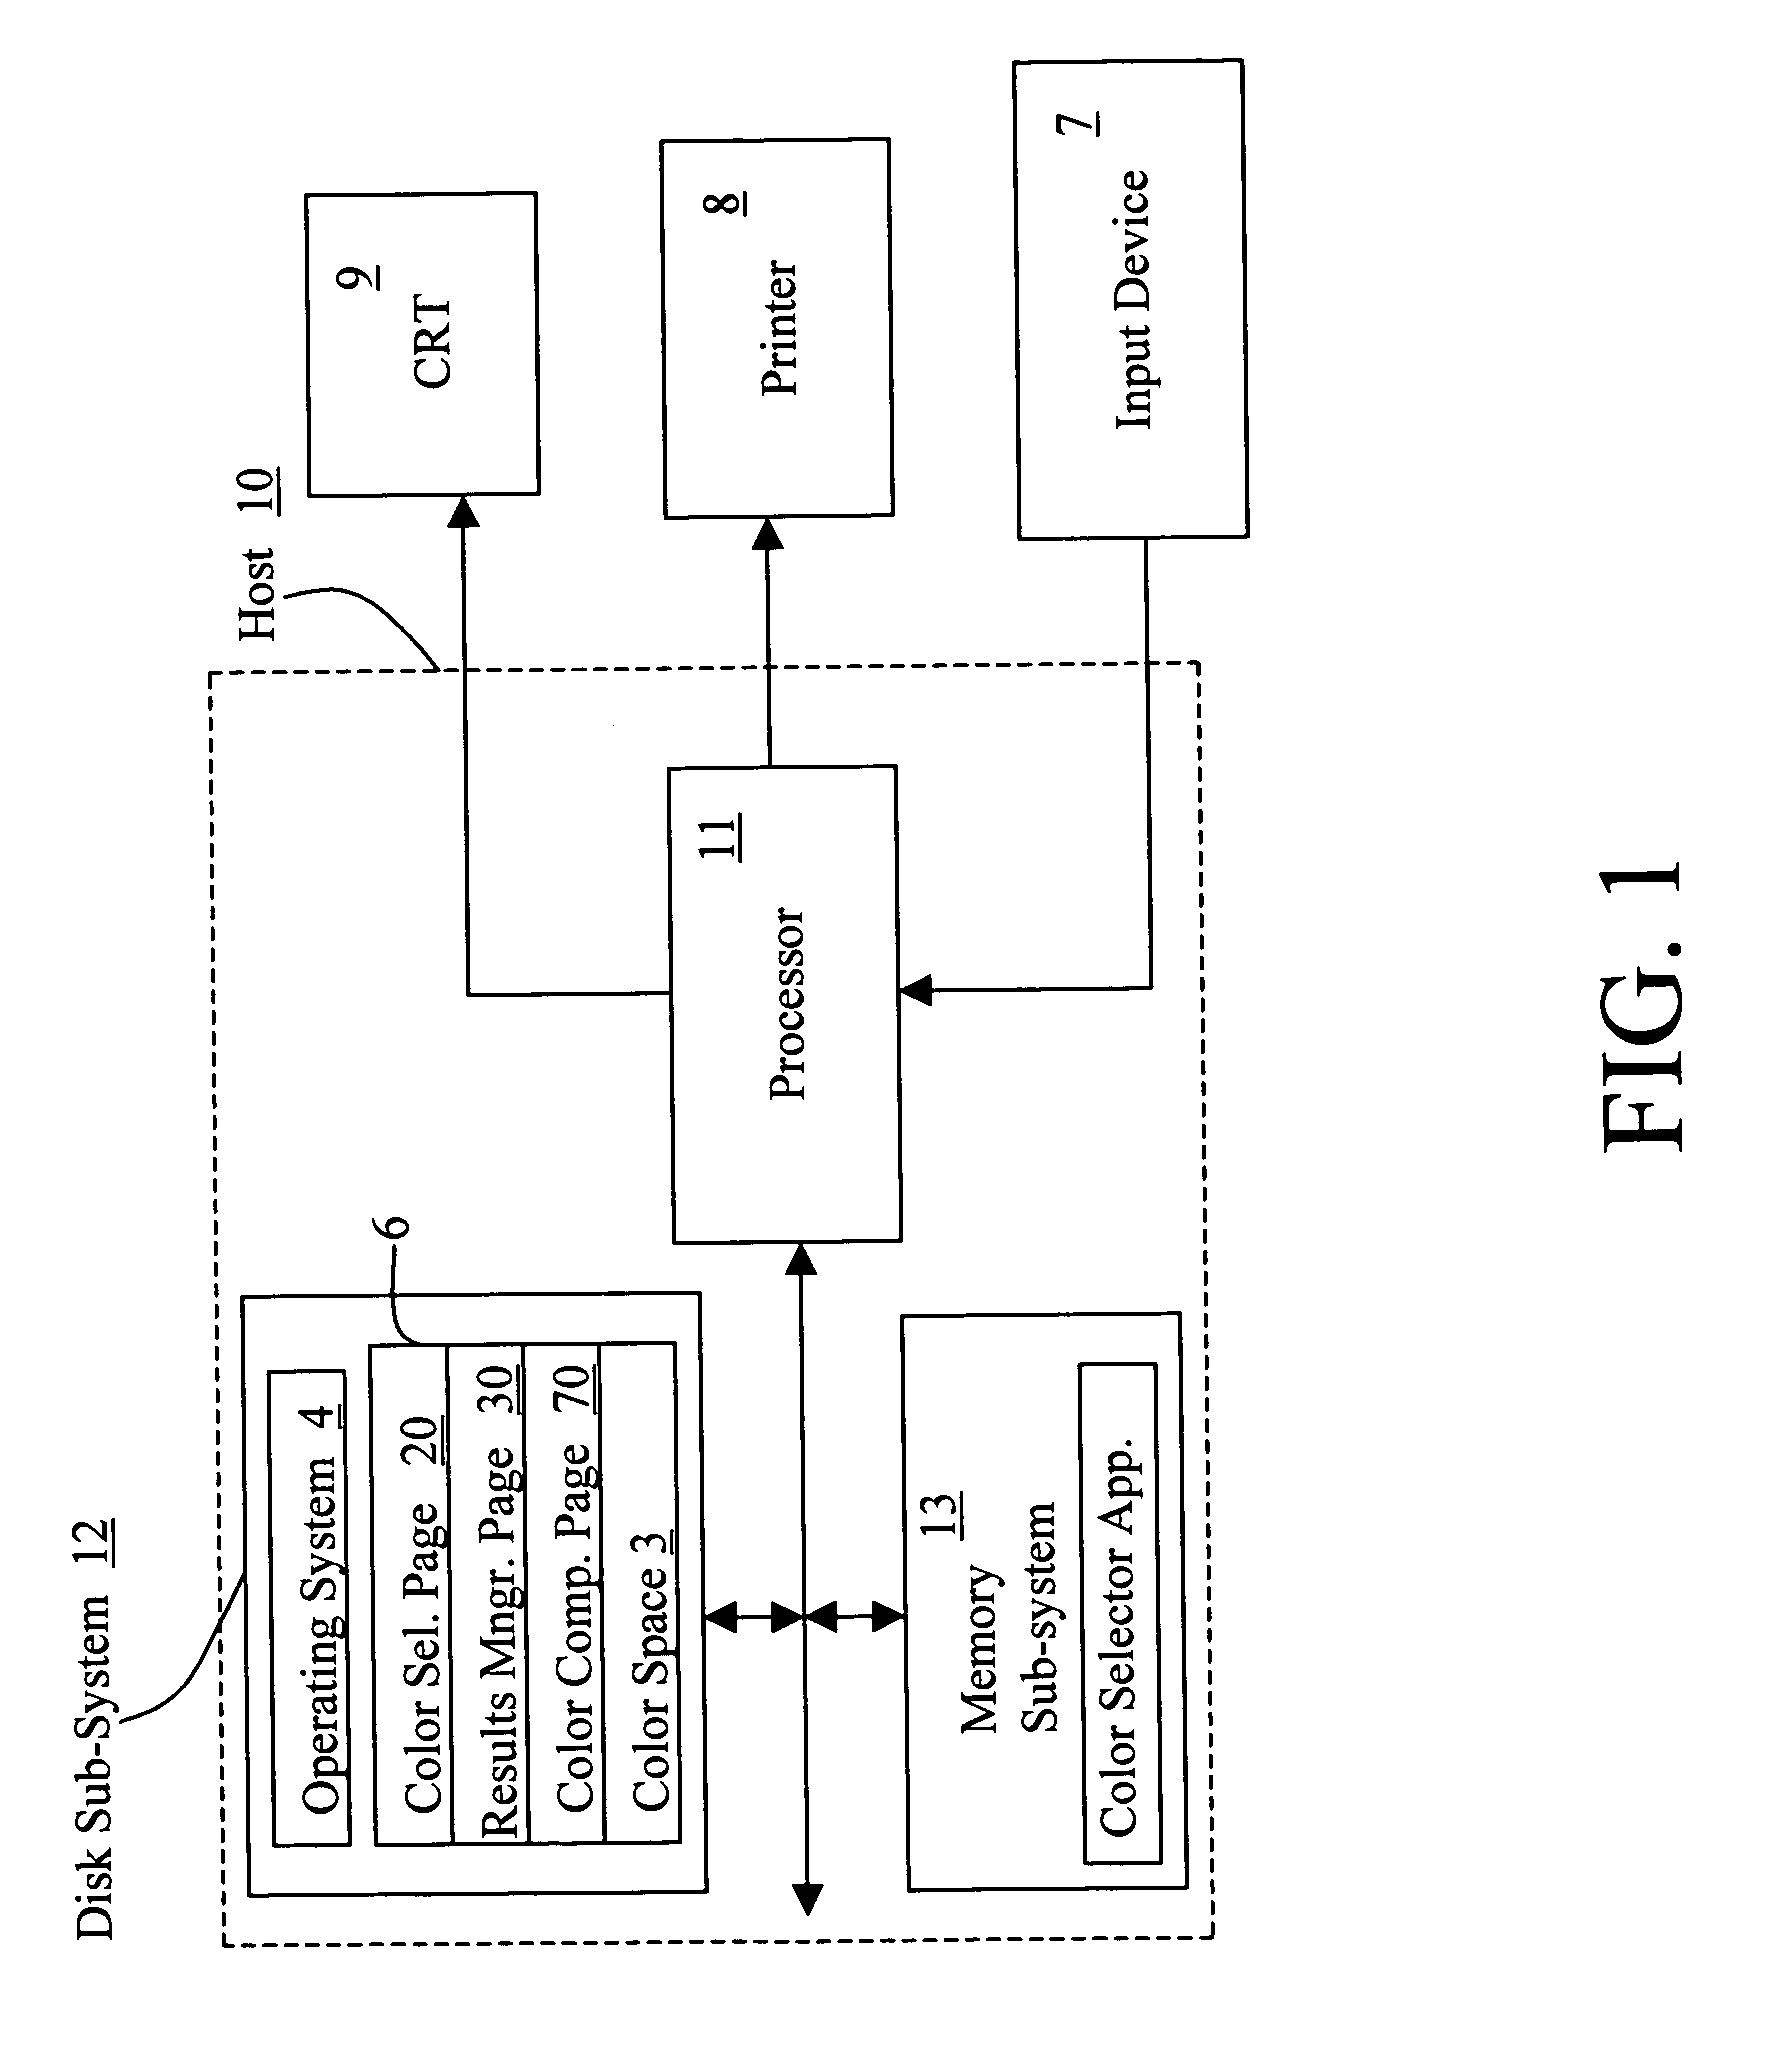 Method and system of improved color selection